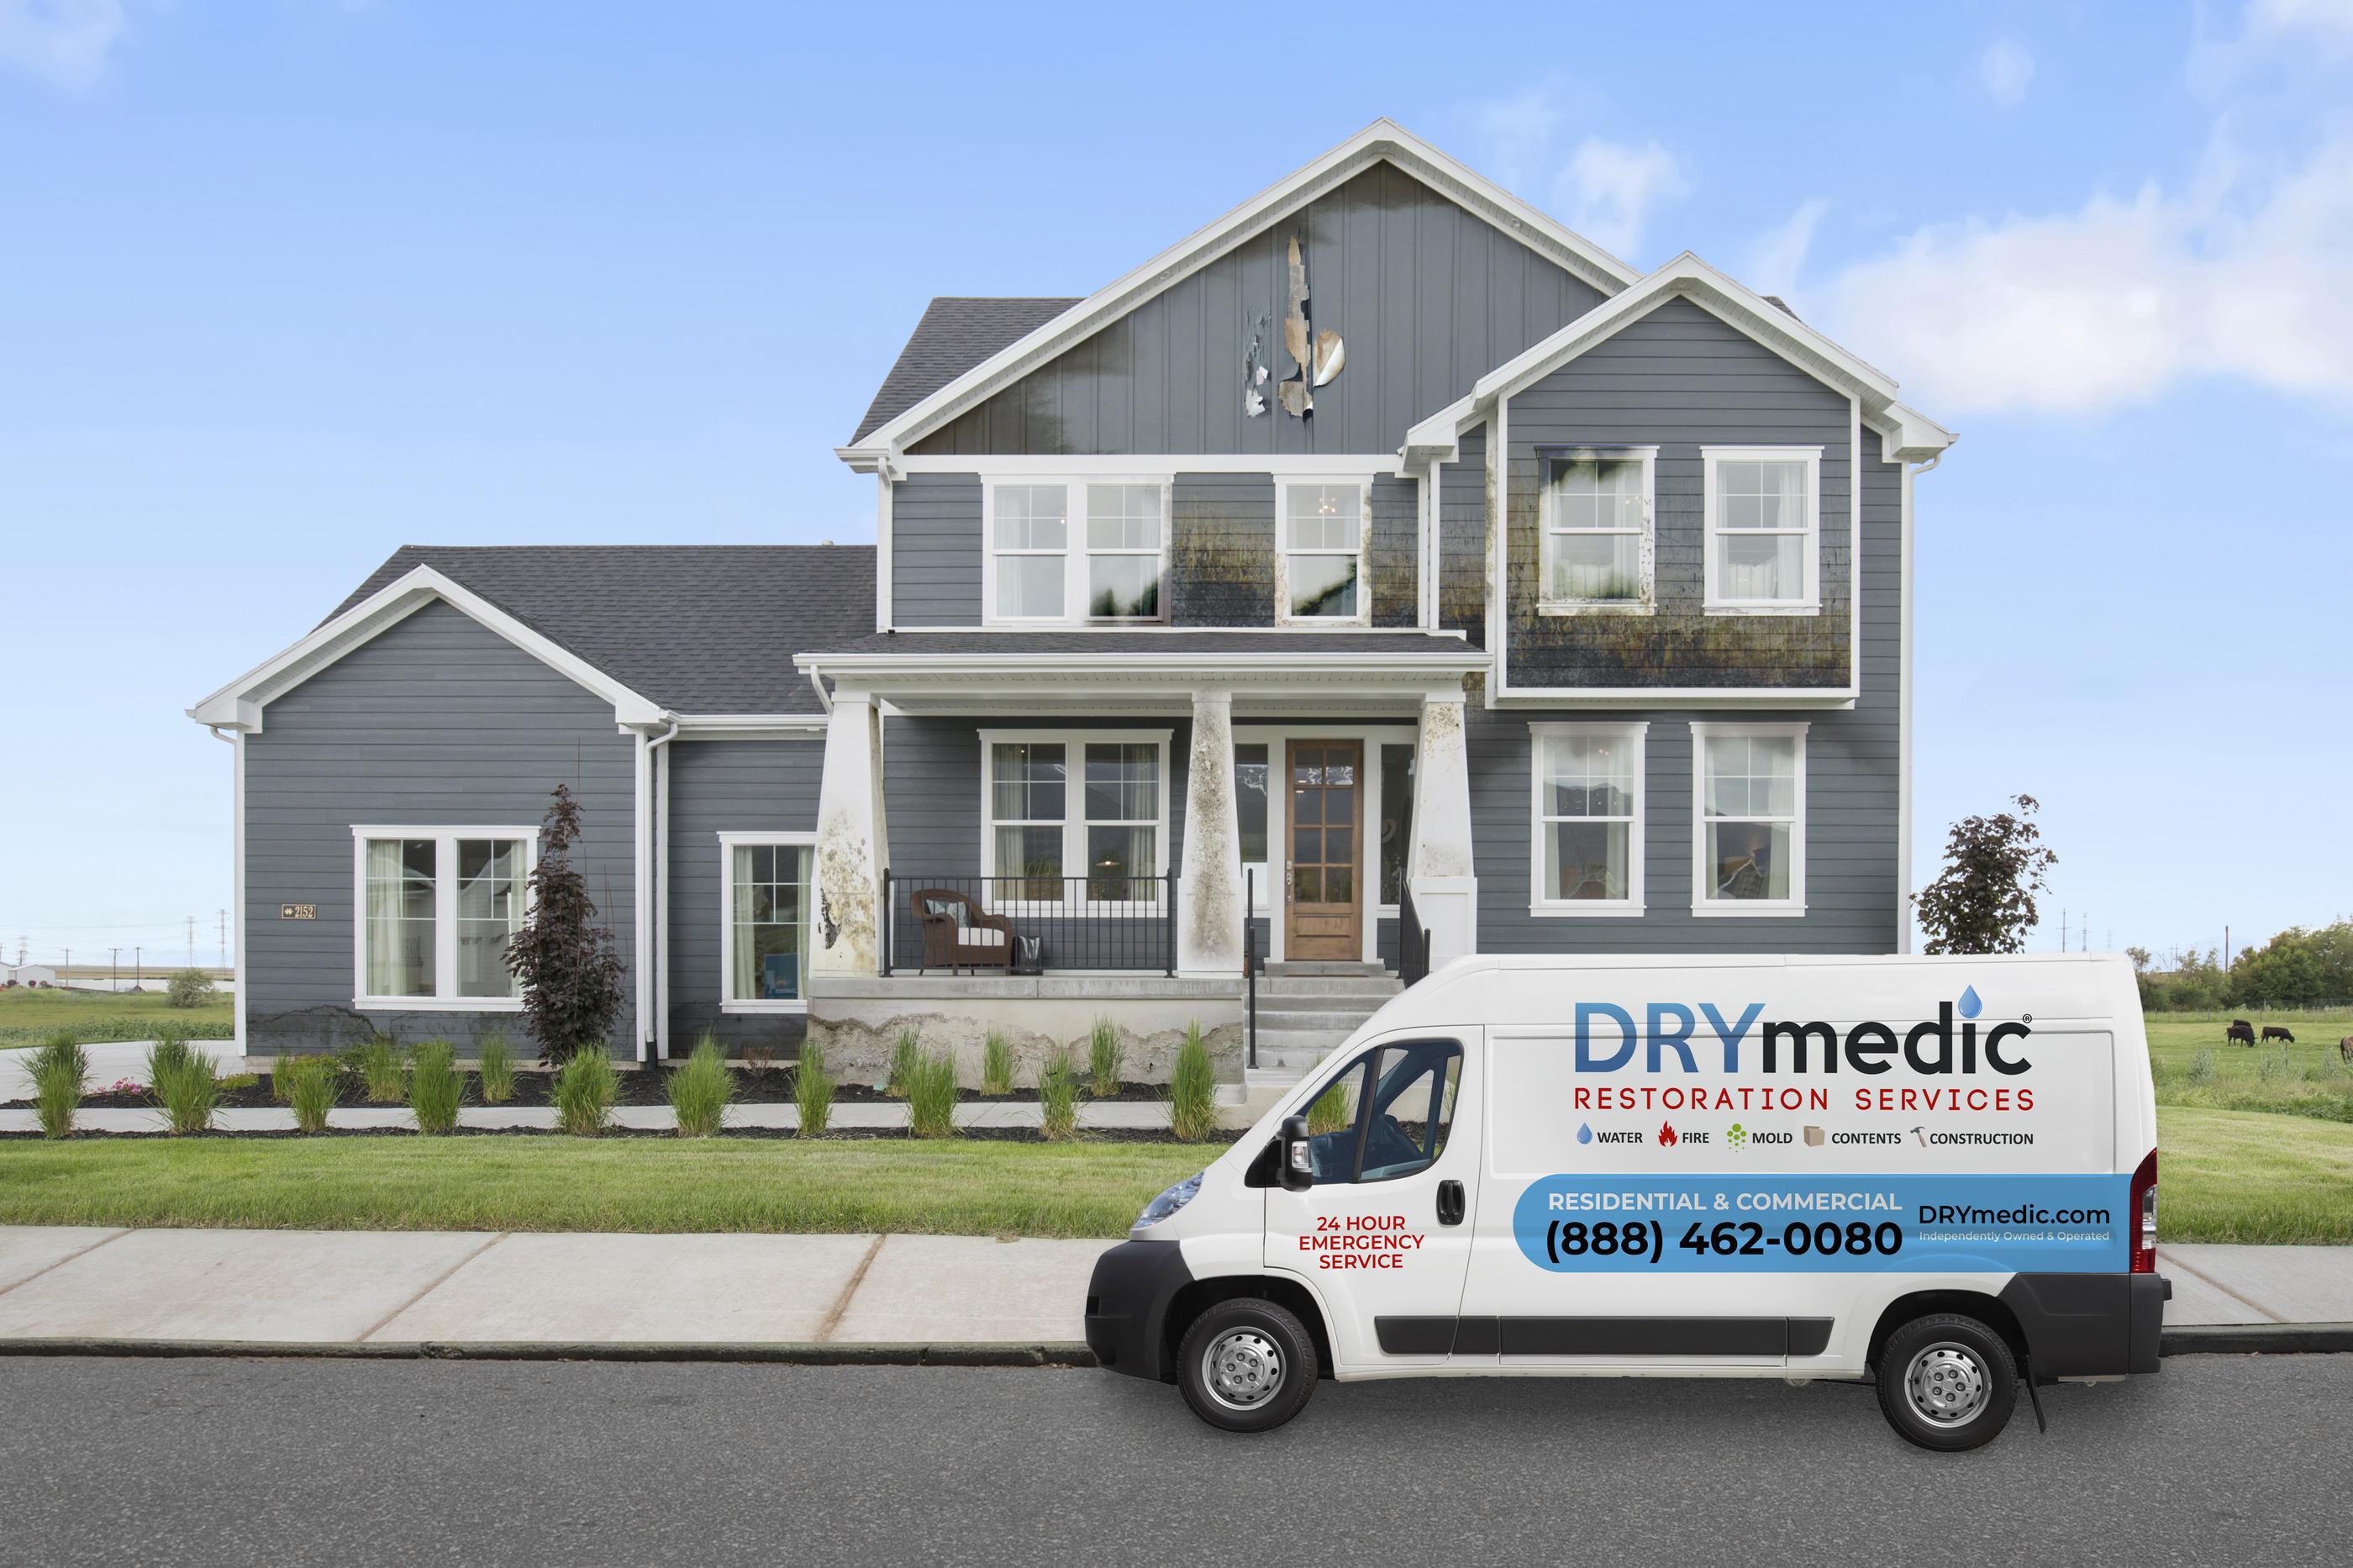 Introducing Northern Colorado to DRYmedic Restoration's Industry-Leading Solutions